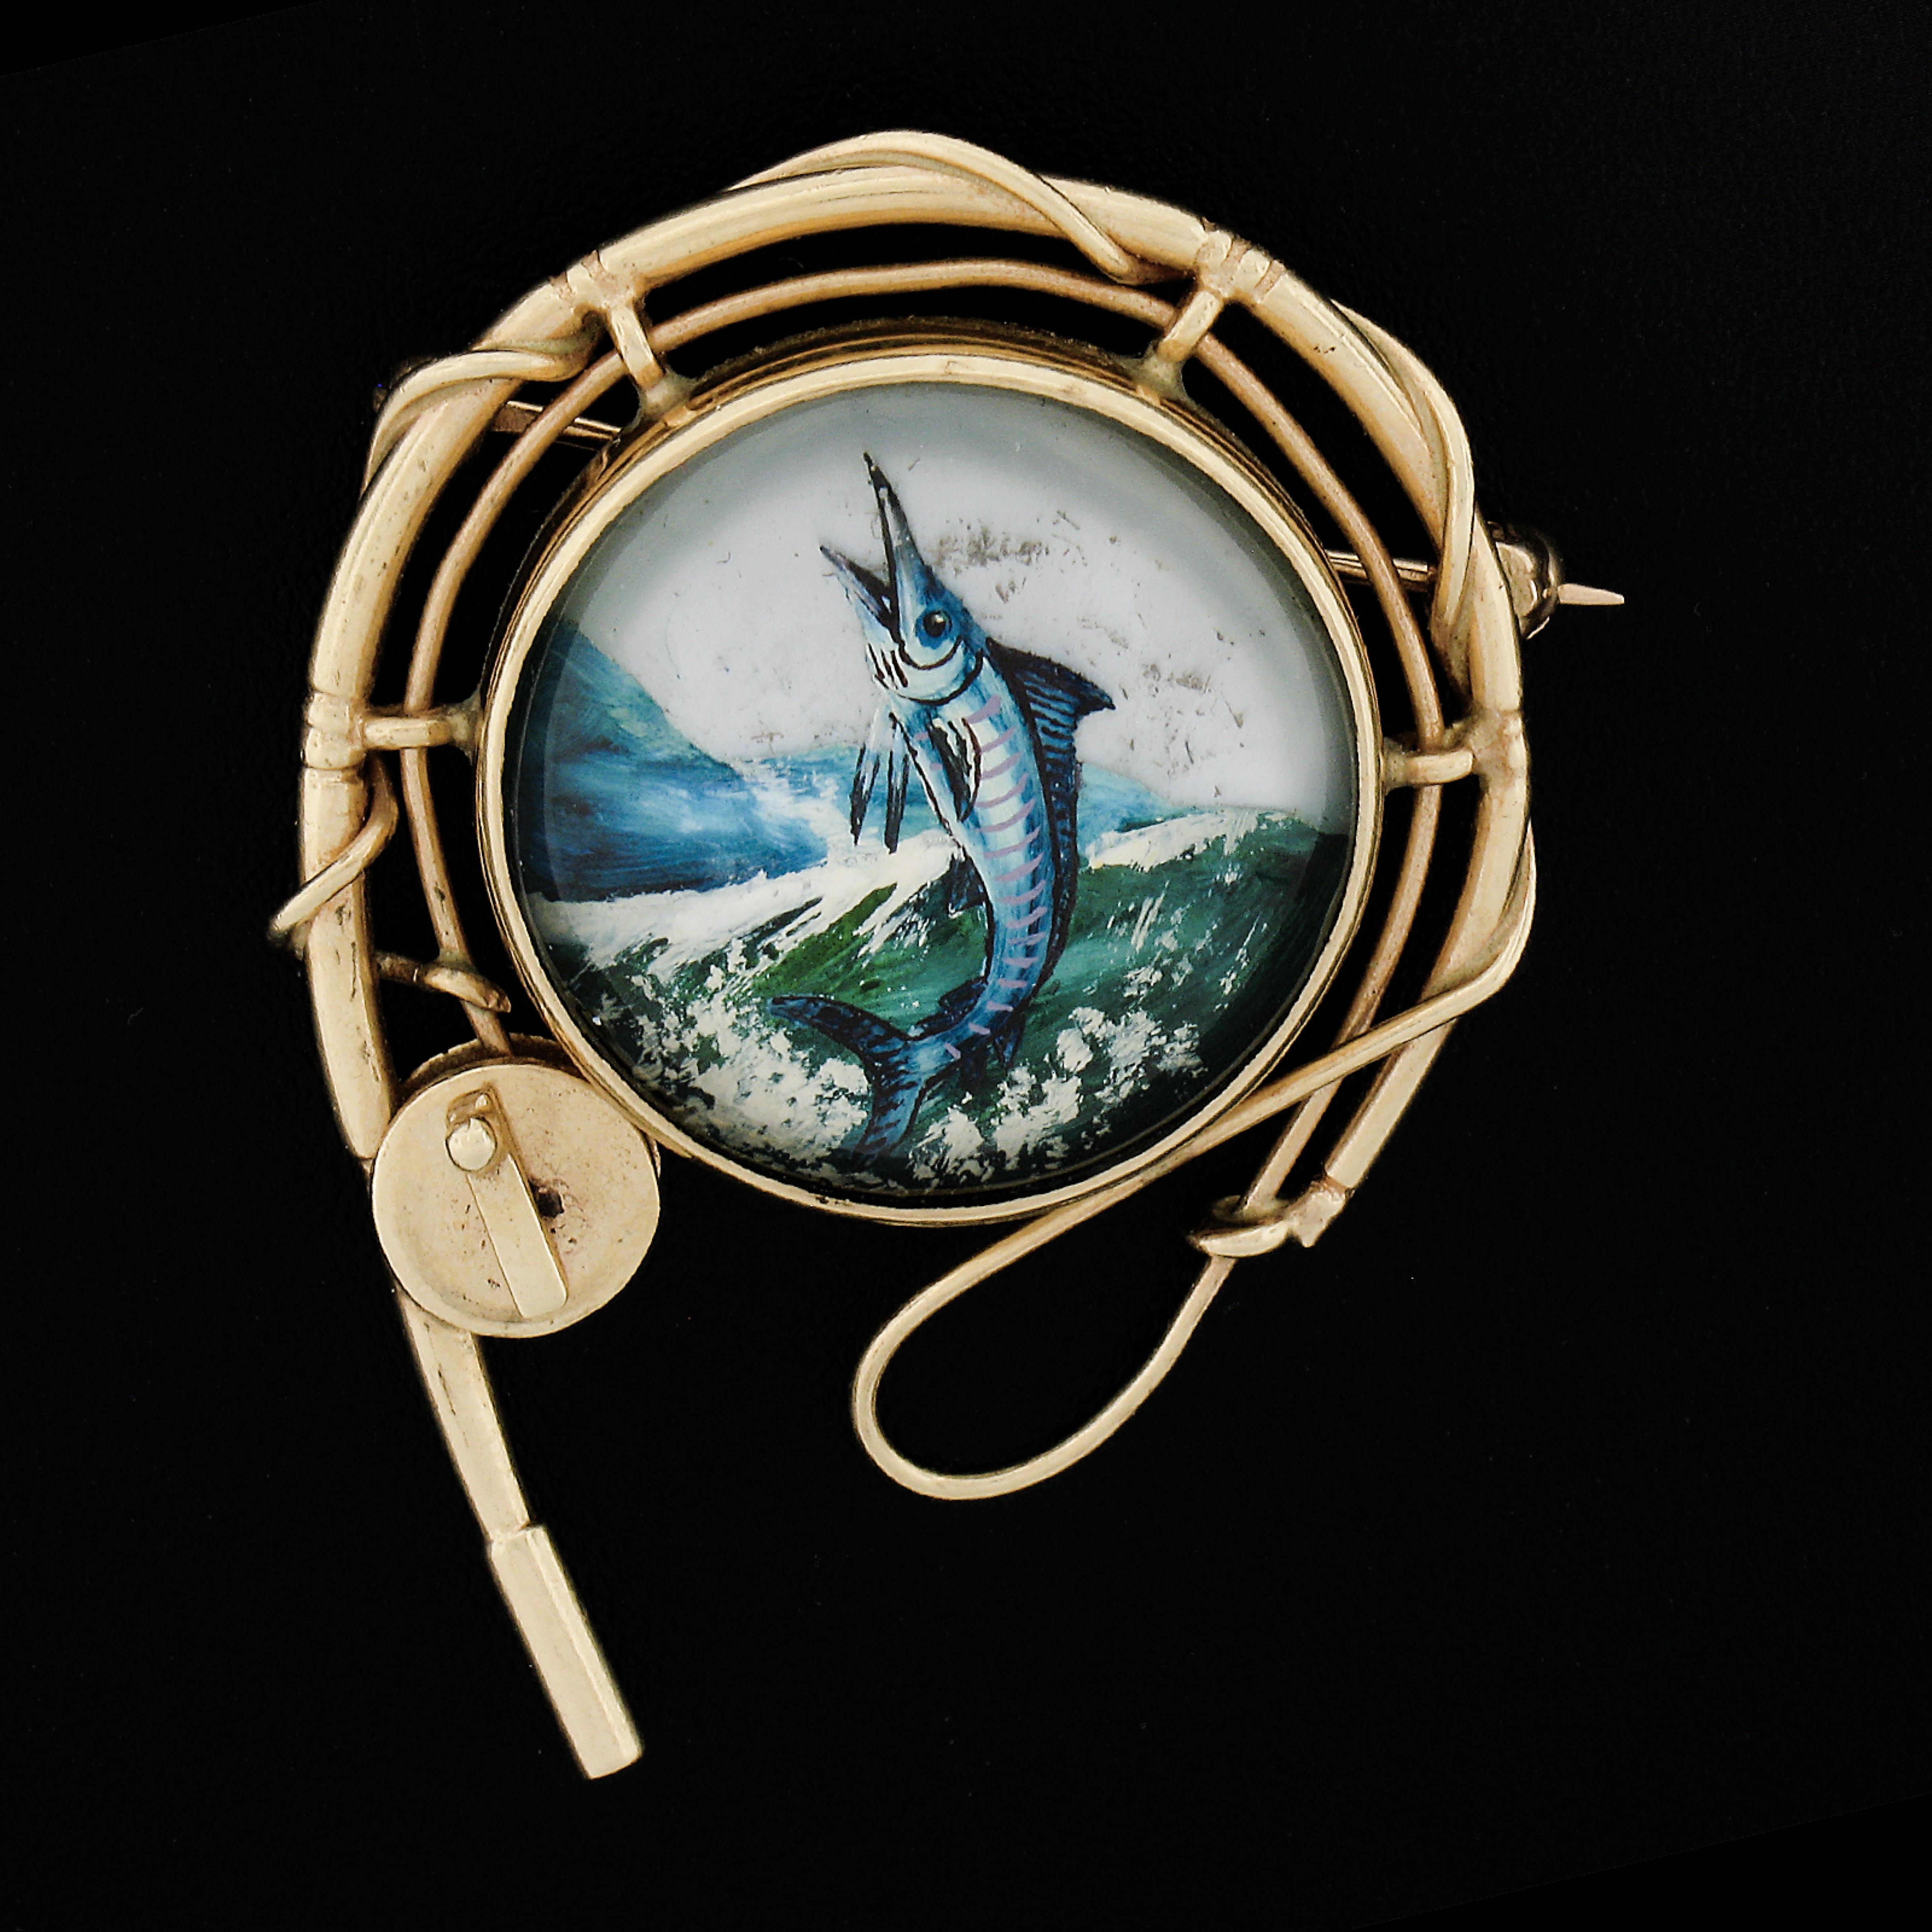 This magnificent vintage brooch was crafted from solid 14k yellow gold. It features an incredibly detailed reverse painted intaglio of a marlin fish jumping of the ocean. This brooch displays outstandingly detailed work and looks incredible and it